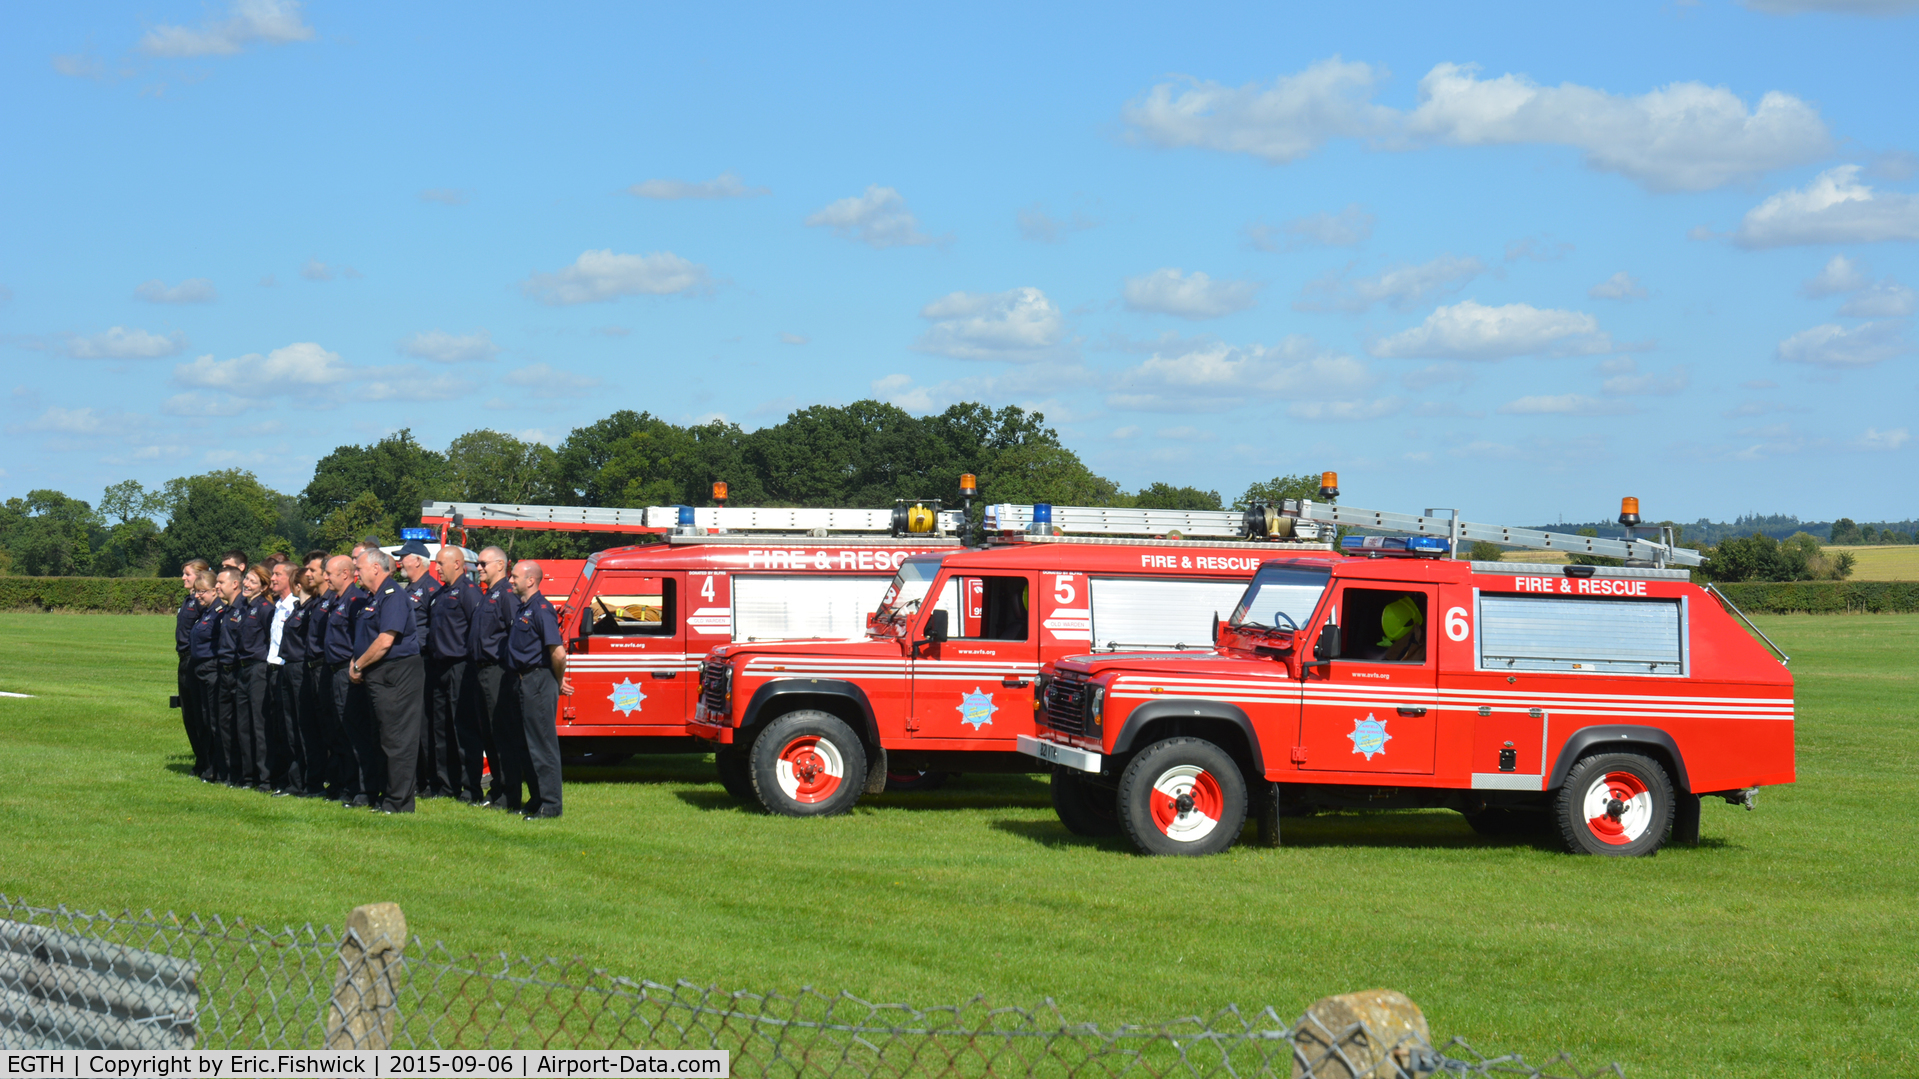 EGTH Airport - The Airfield Volunteer Fire Service, based at Old Warden, receiving the Queen's Award for Voluntary Service - The highest award given to voluntary groups across the U.K. for outstanding work done in their local communities. Sept. 2015.